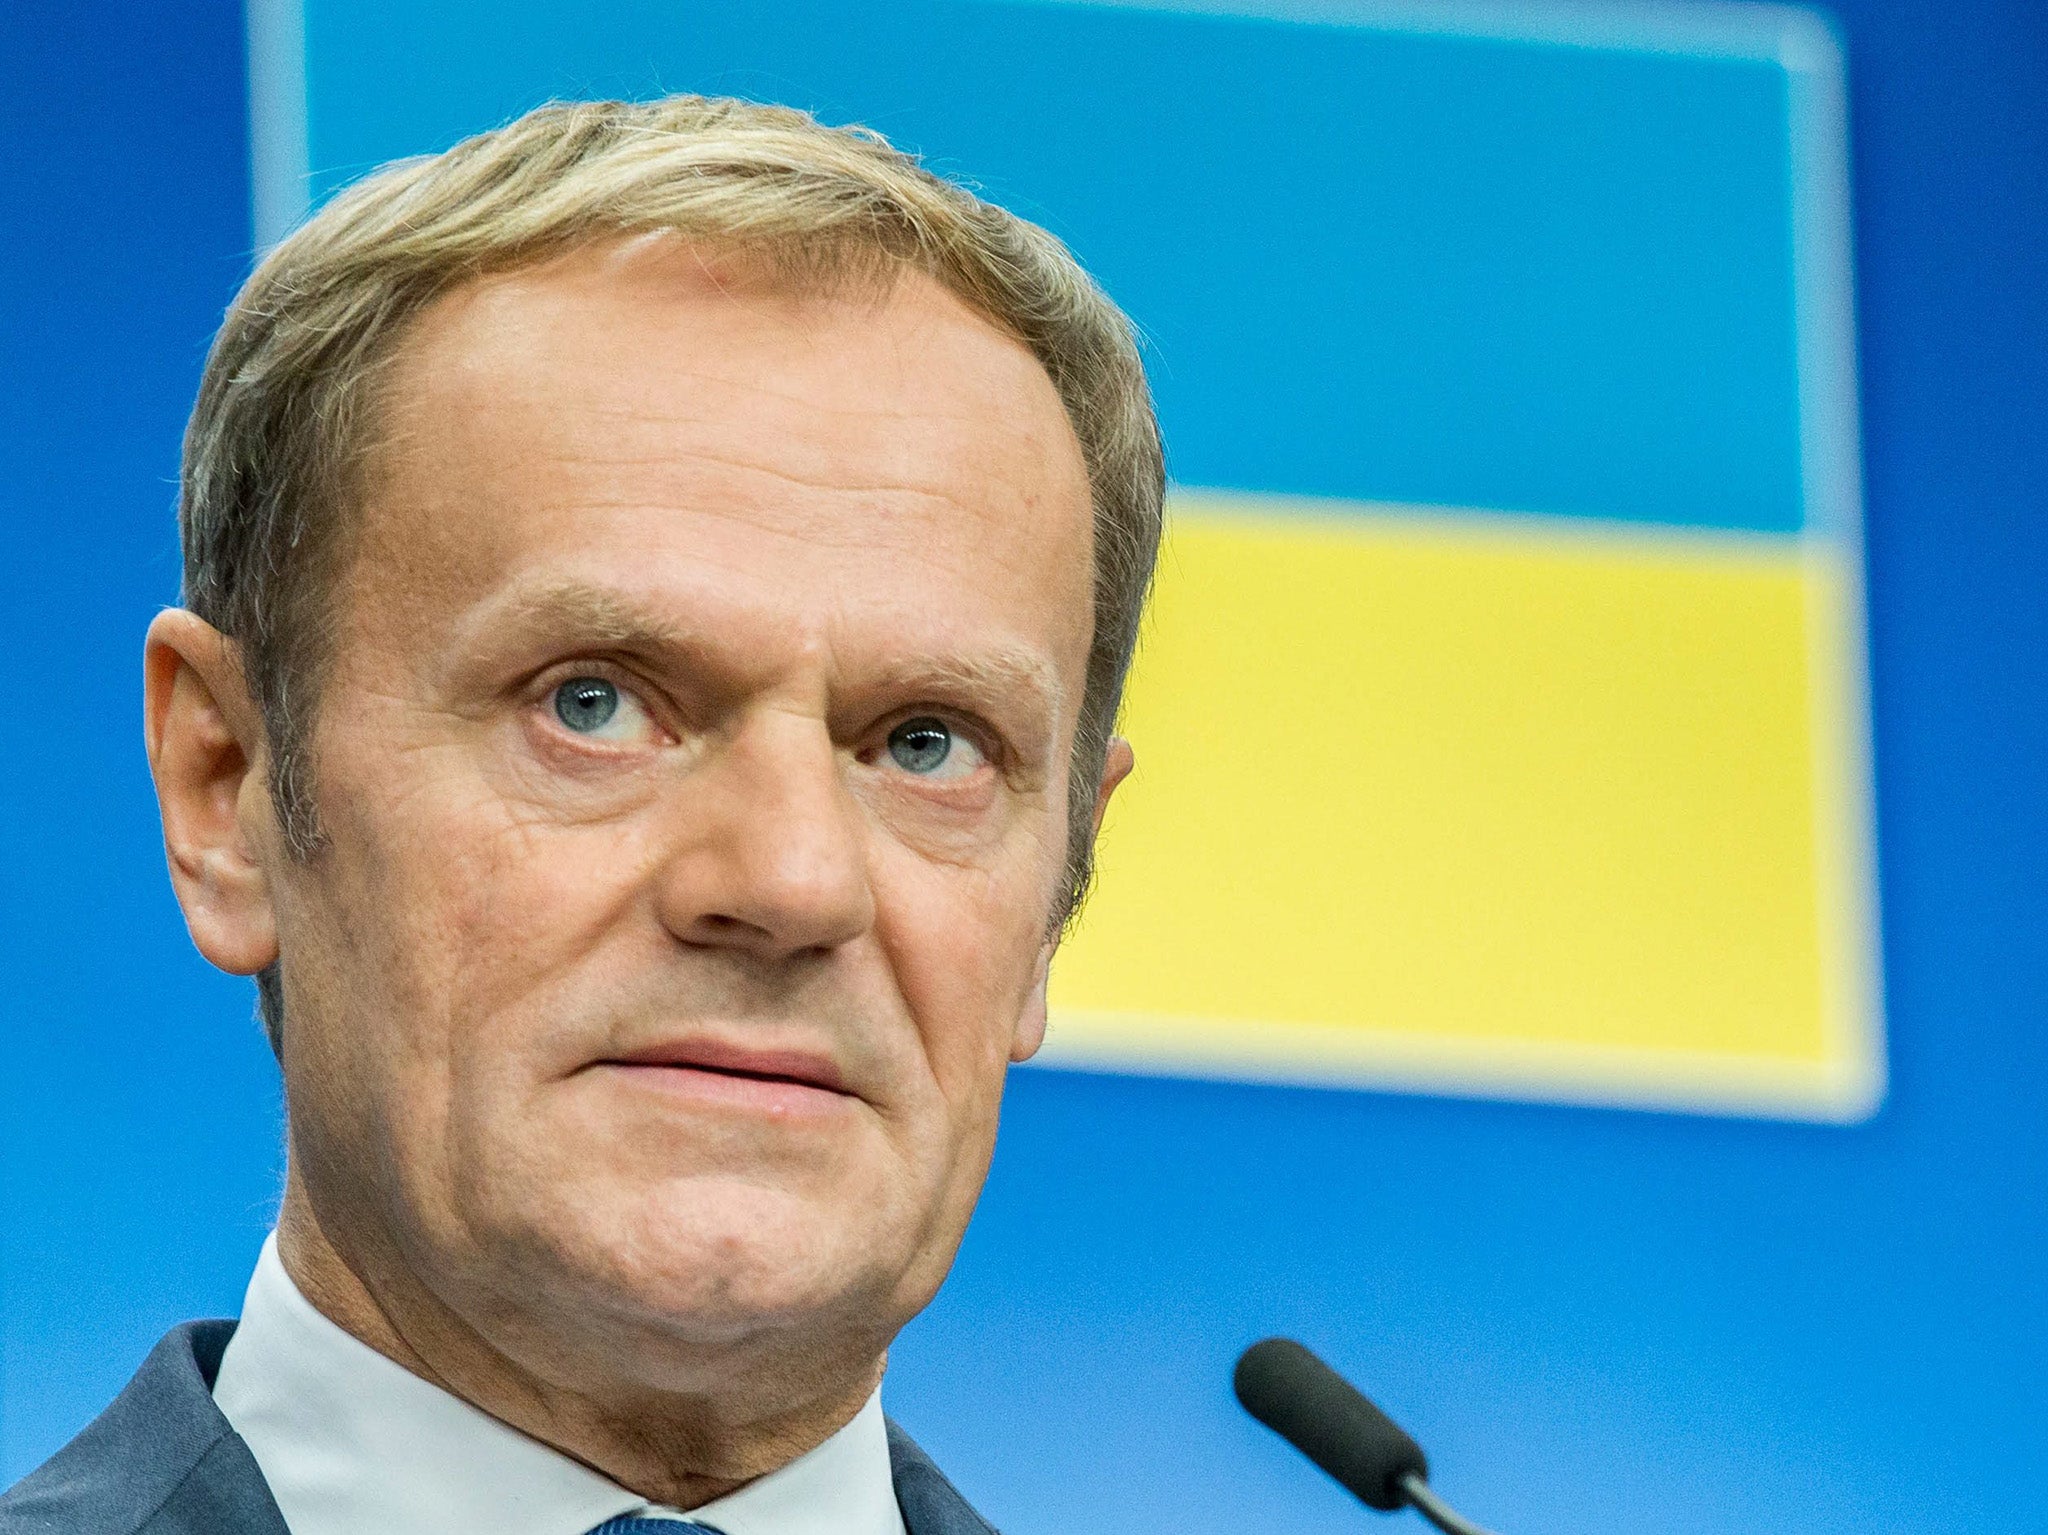 Mr Tusk’s comments among most hard-hitting to be directed at new President